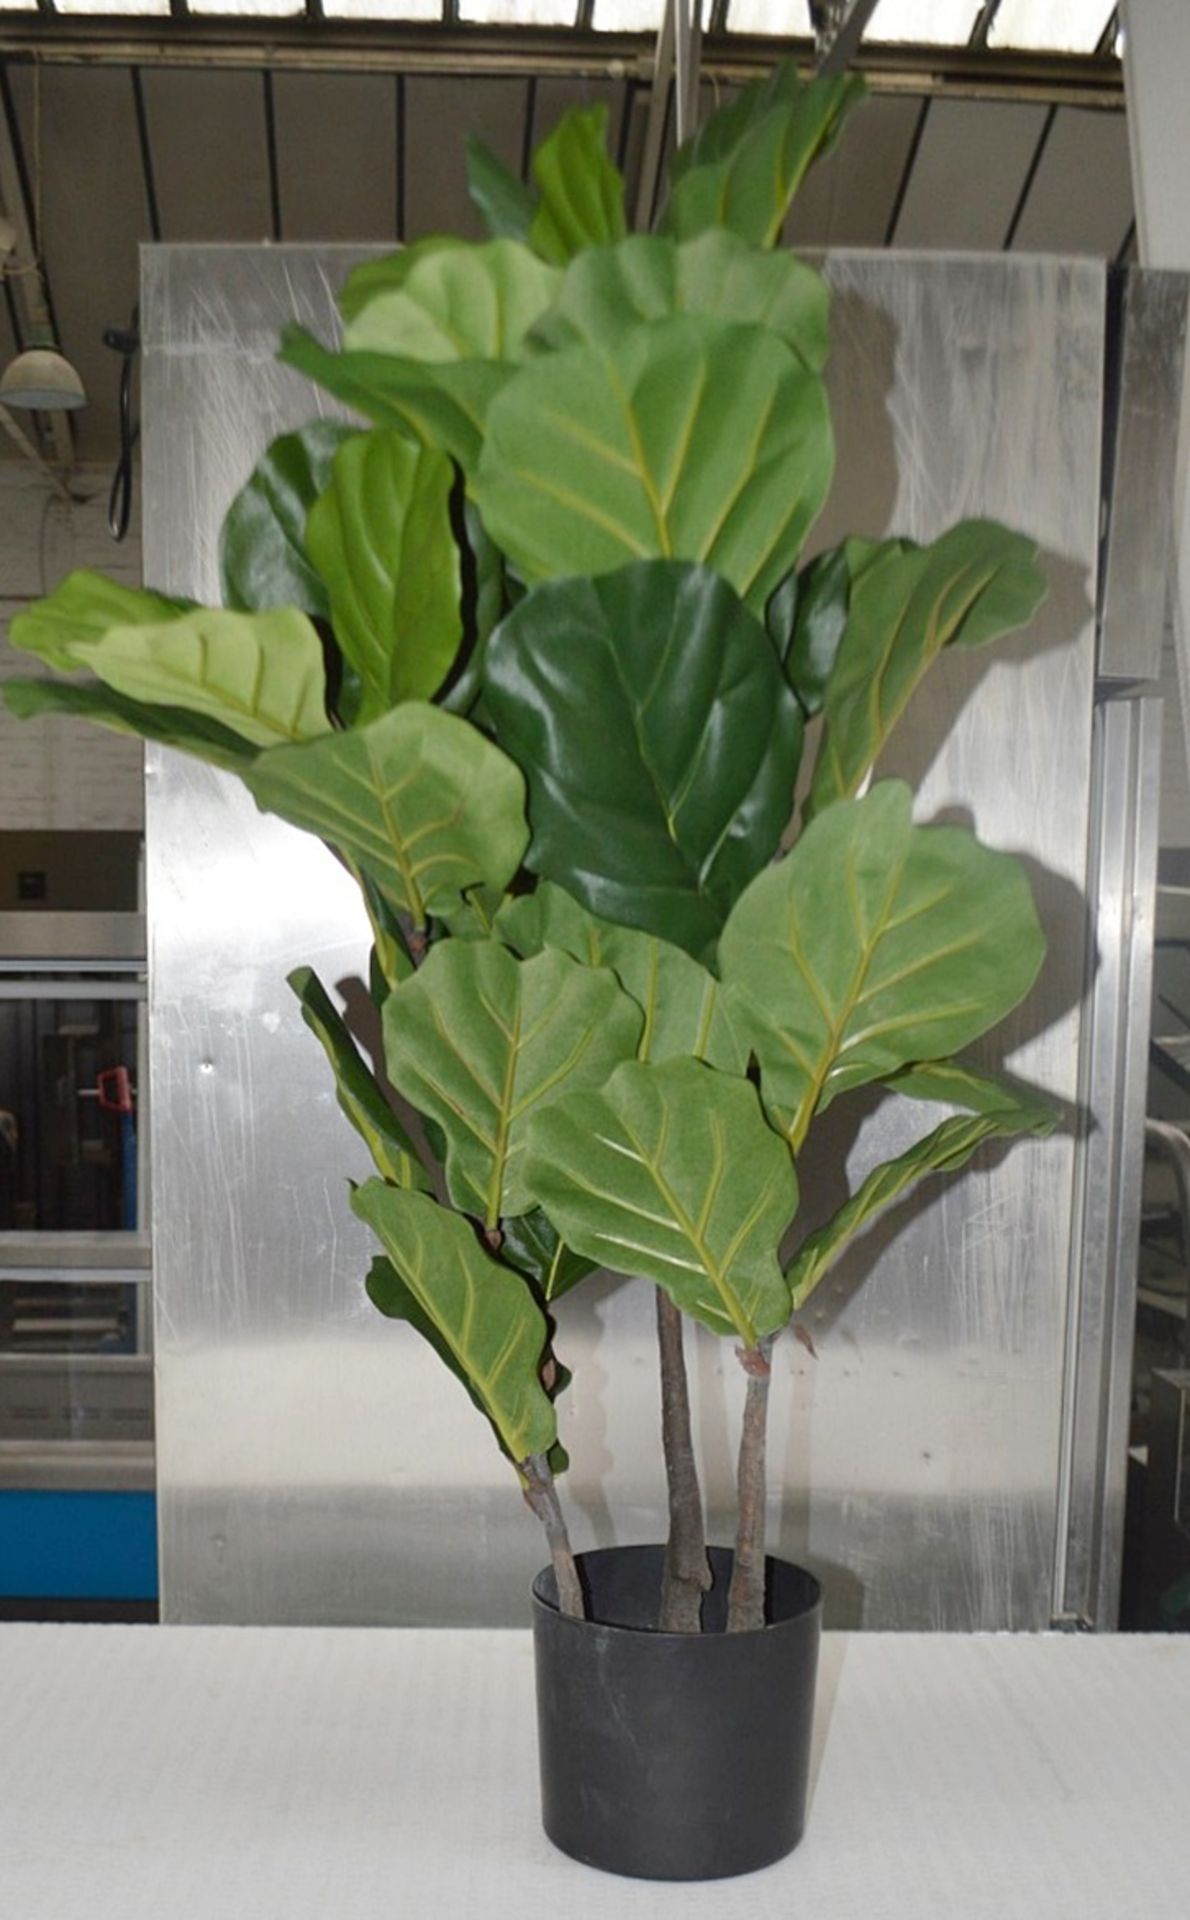 3 x Commercial Artificial Potted Plants Display - High Quality Ex-Display Showroom Pieces - Ref: - Image 4 of 5